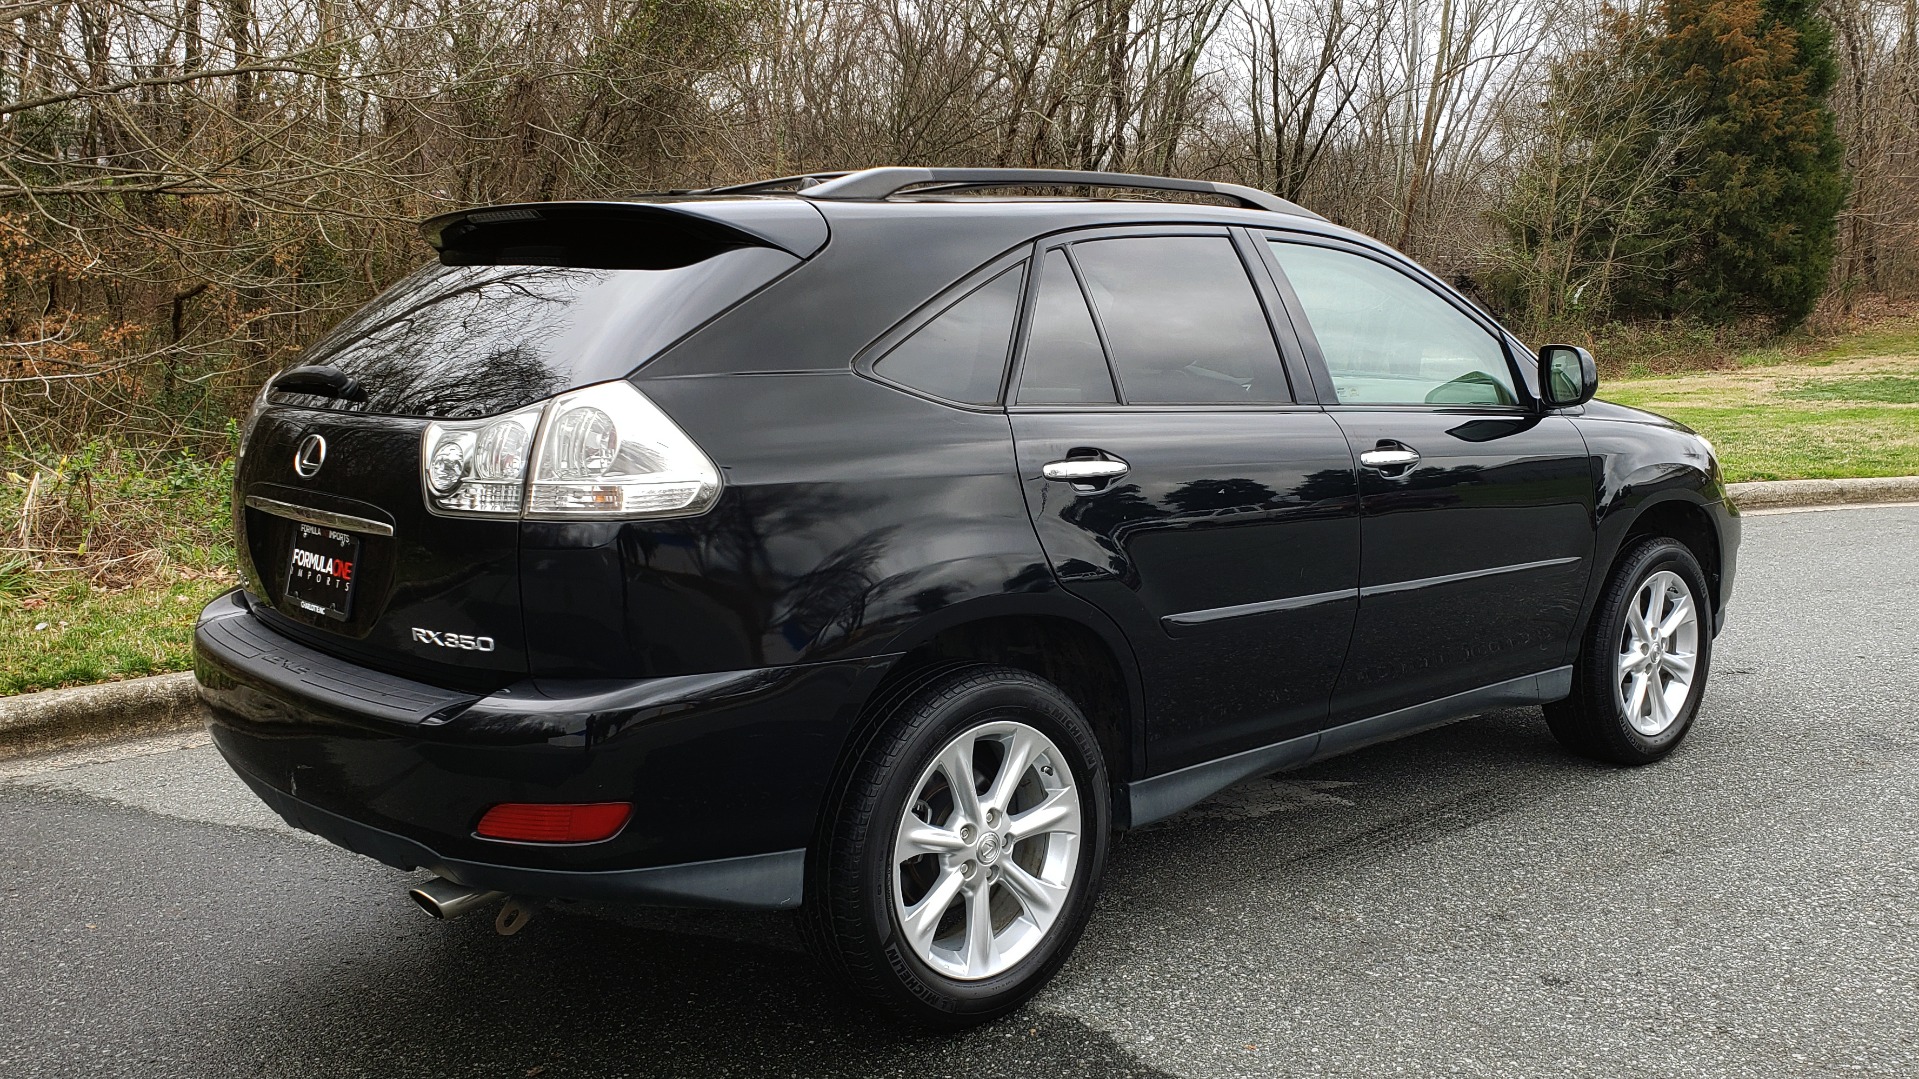 Used 2008 Lexus RX 350 LUXURY EDITION / NAV / SUNROOF / REARVIEW for sale Sold at Formula Imports in Charlotte NC 28227 6